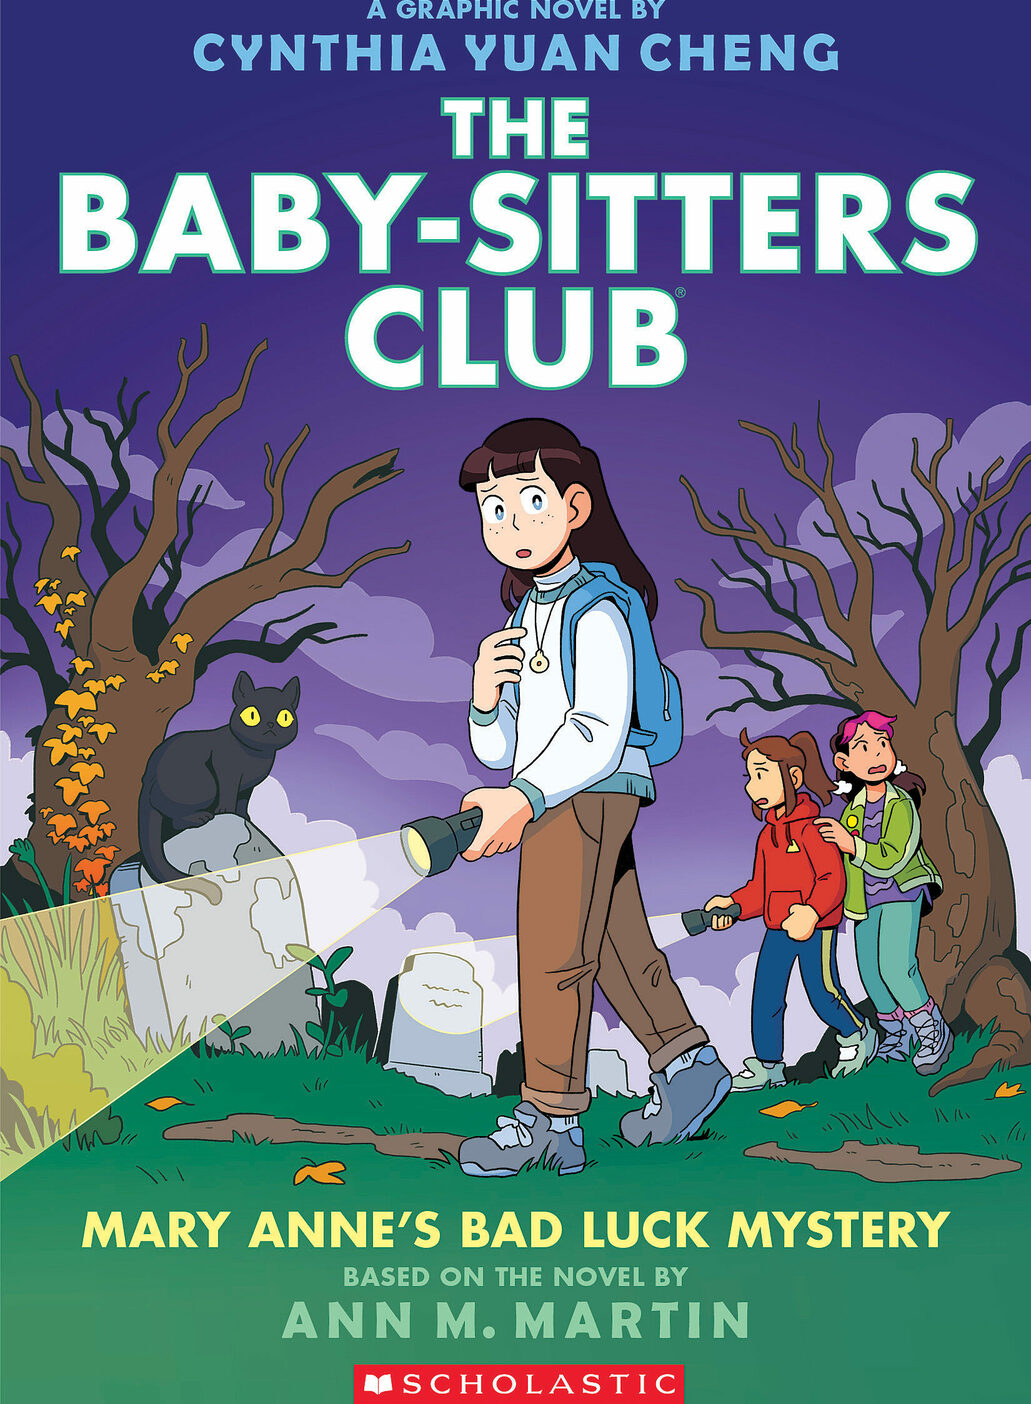 Mary Anne's Bad Luck Mystery: A Graphic Novel (The Baby-sitters Club #13)